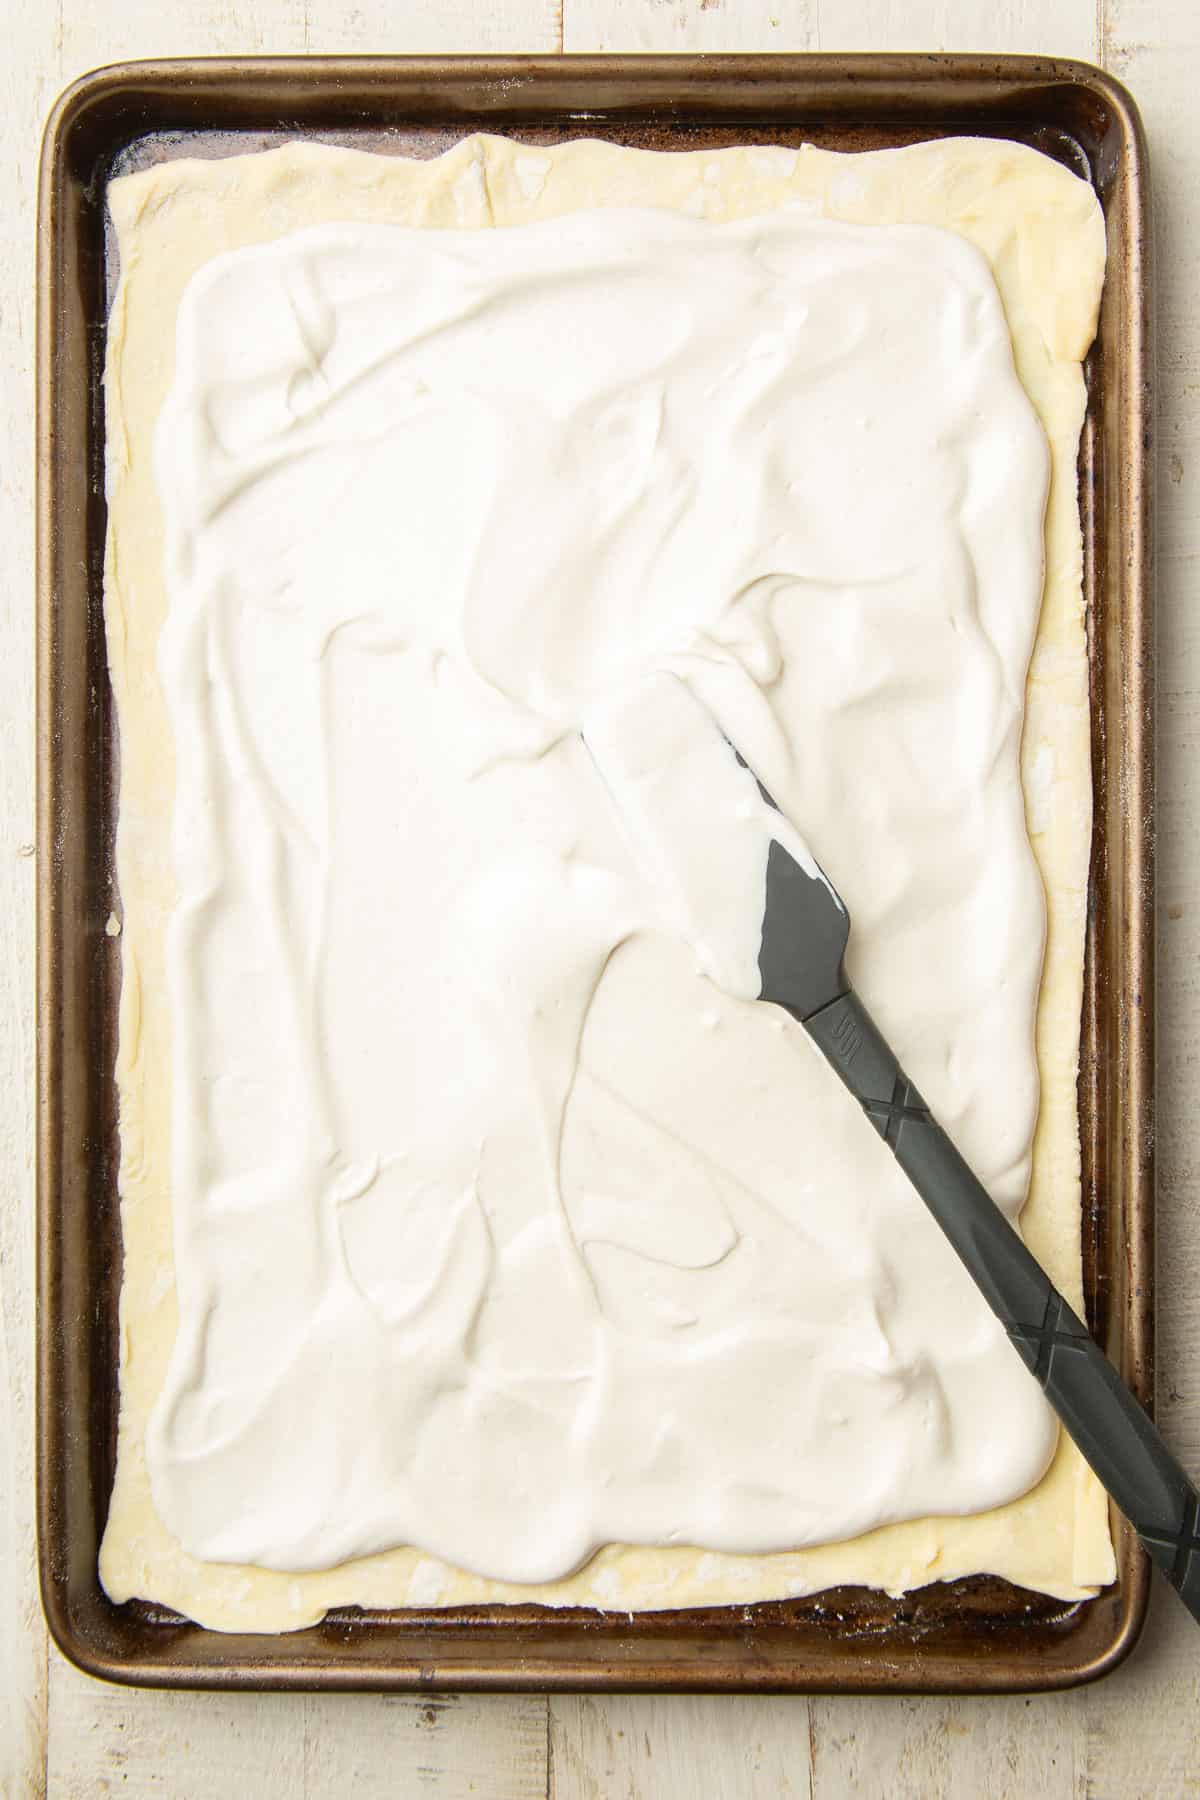 Cashew cheese being spread over a sheet of puff pastry on a baking sheet.